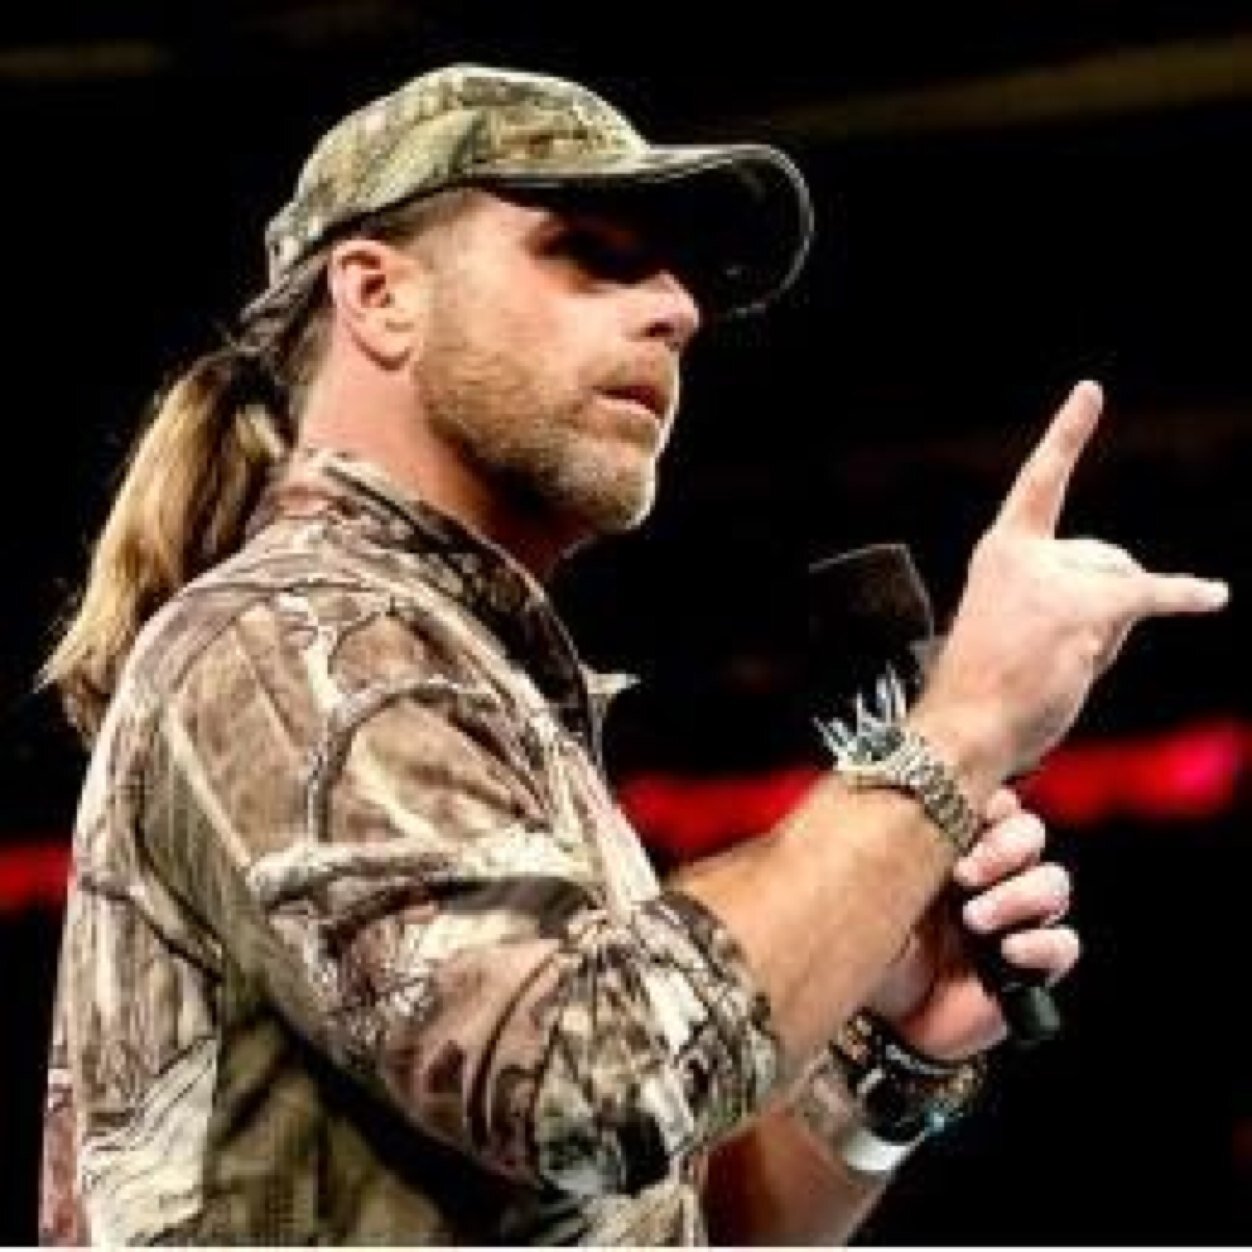 Shawn Michaels, is an American professional wrestling personality, television presenter and retired professional wrestler. (FanPage)